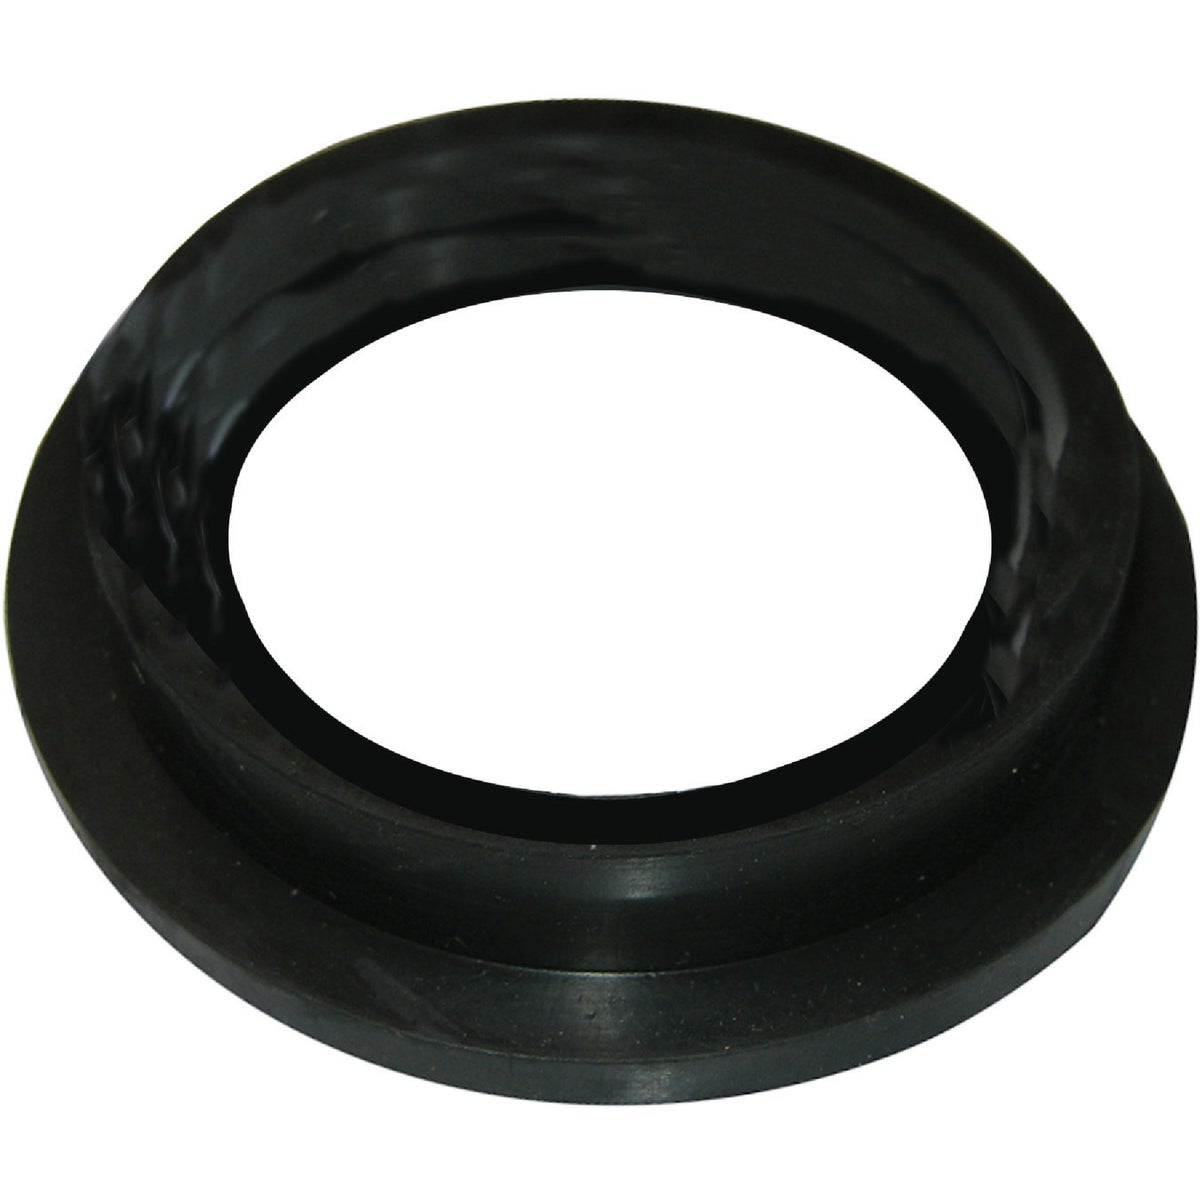 Lasco 1-1/2 In. Black Rubber Toilet Spud Flanged Washer 